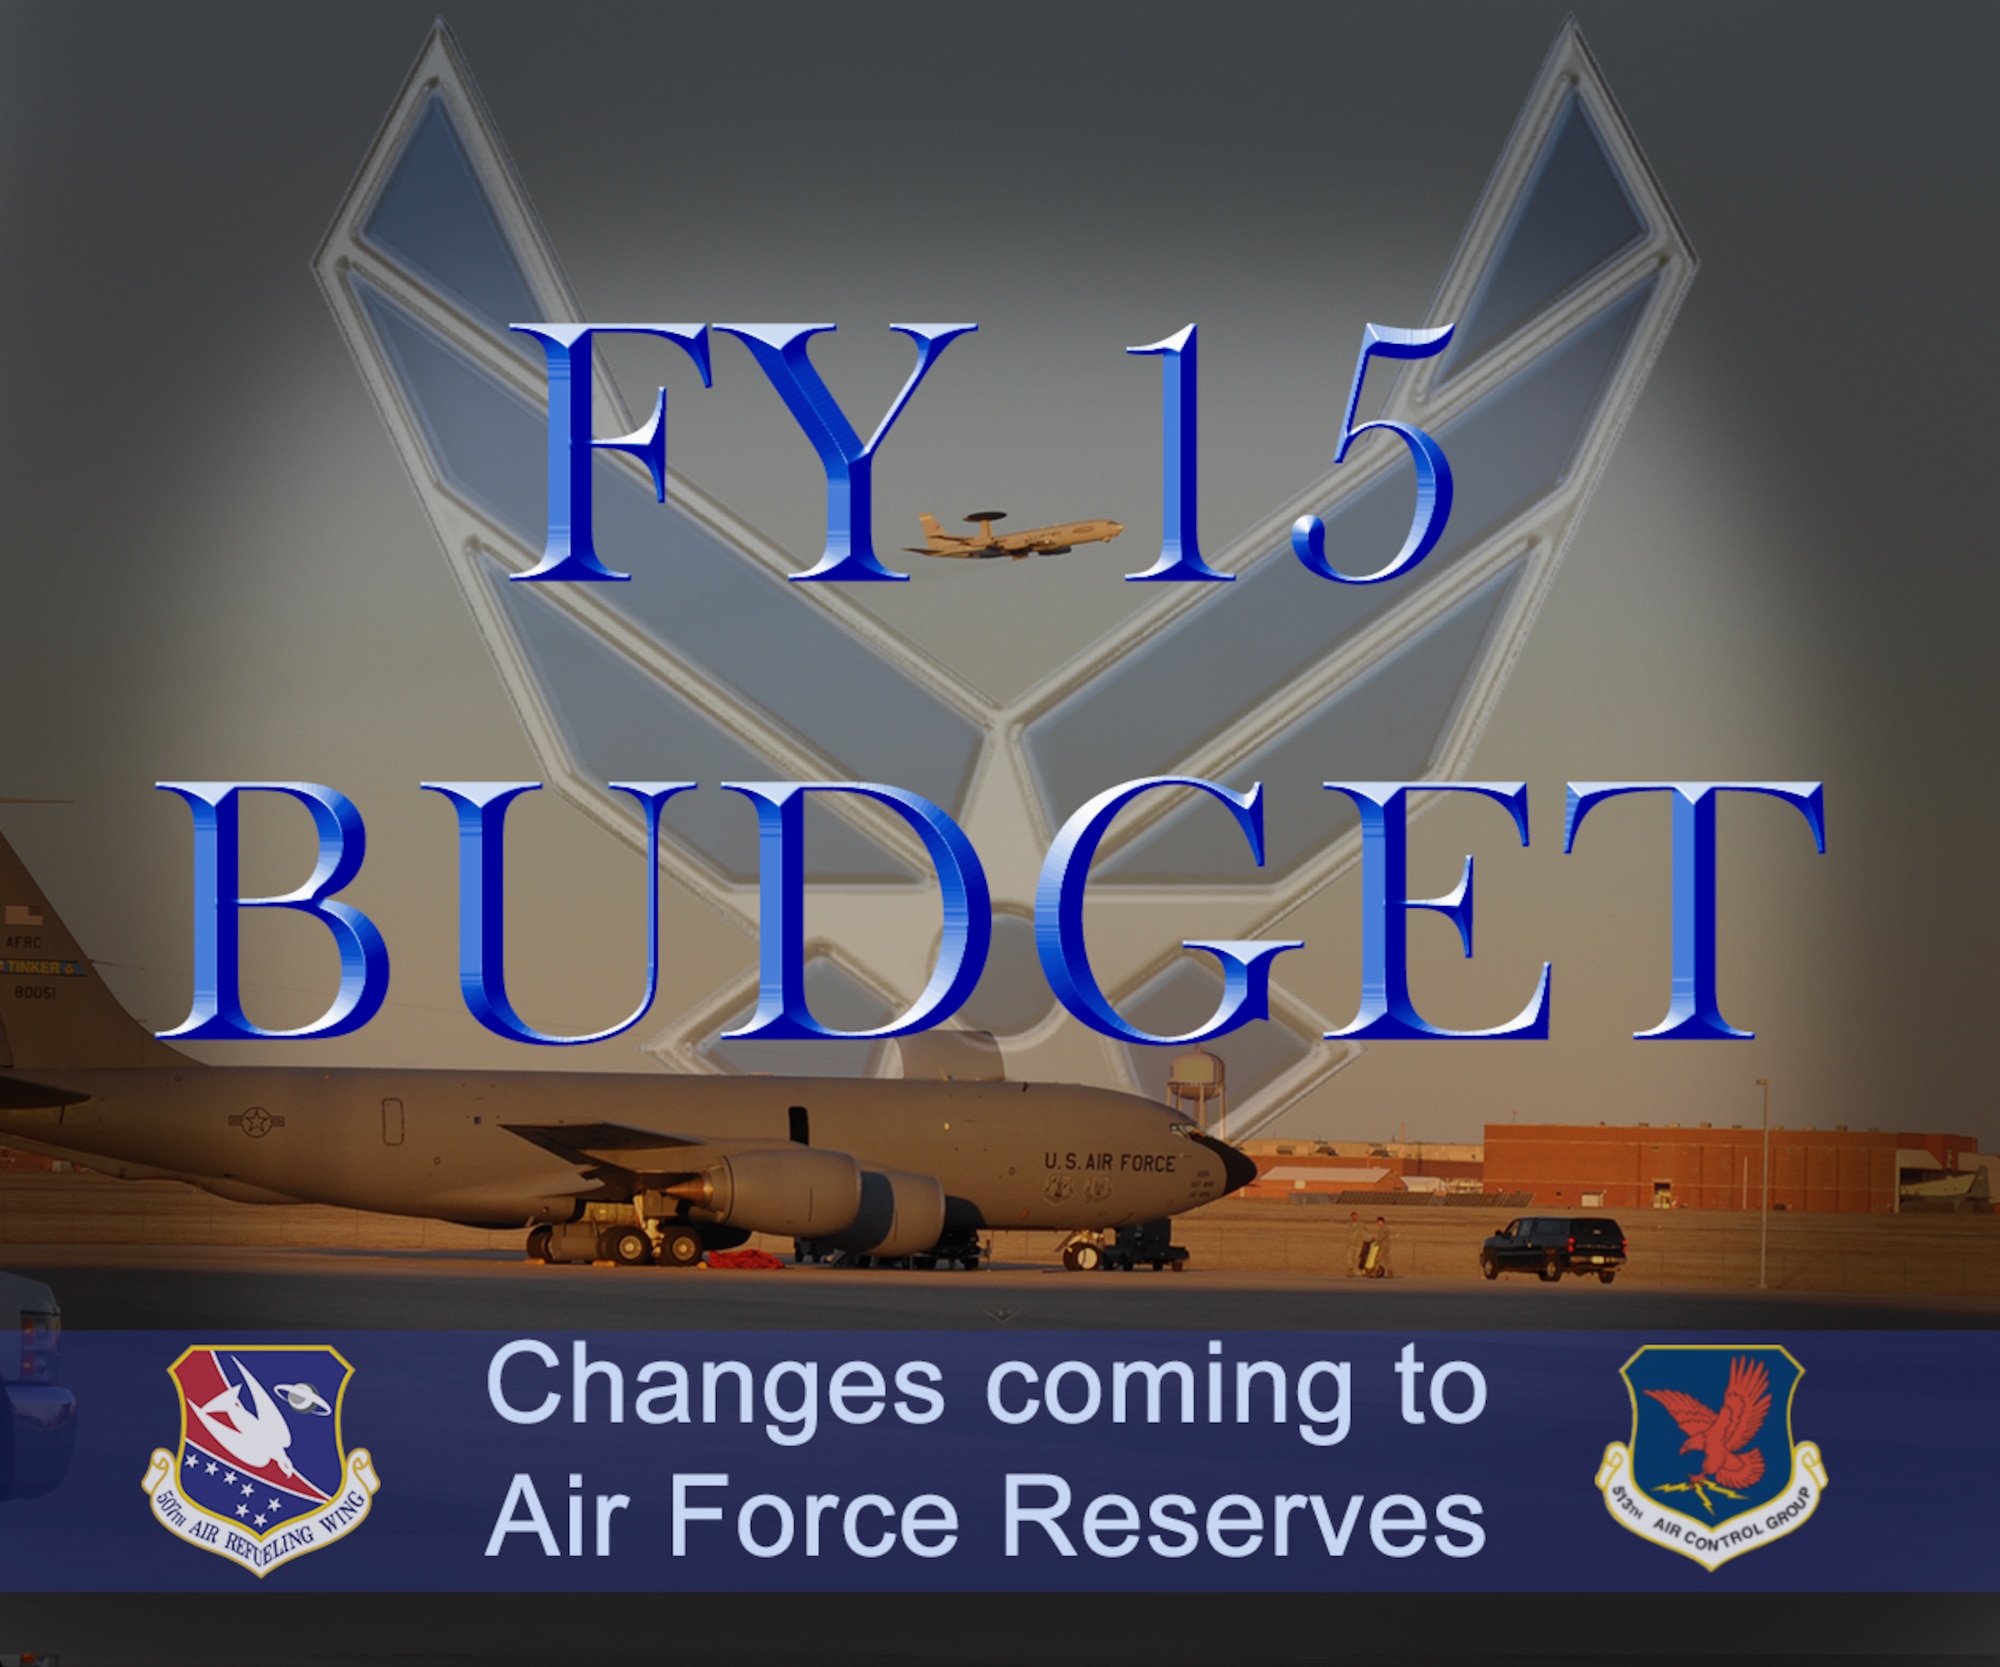 The Department of Defense budget request for fiscal 2015 includes a number of proposed changes for the Air Force Reserve. For reserve units at Tinker Air Force Base, the request directs an increase of four KC-135R Stratotankers to the 507th Air Refueling Wing and inactivates the 513th Air Control Group, whose personnel fly and maintain the E-3 Airborne Warning and Control System. (U.S. Air Force photo illustration/Senior Airman Mark Hybers)